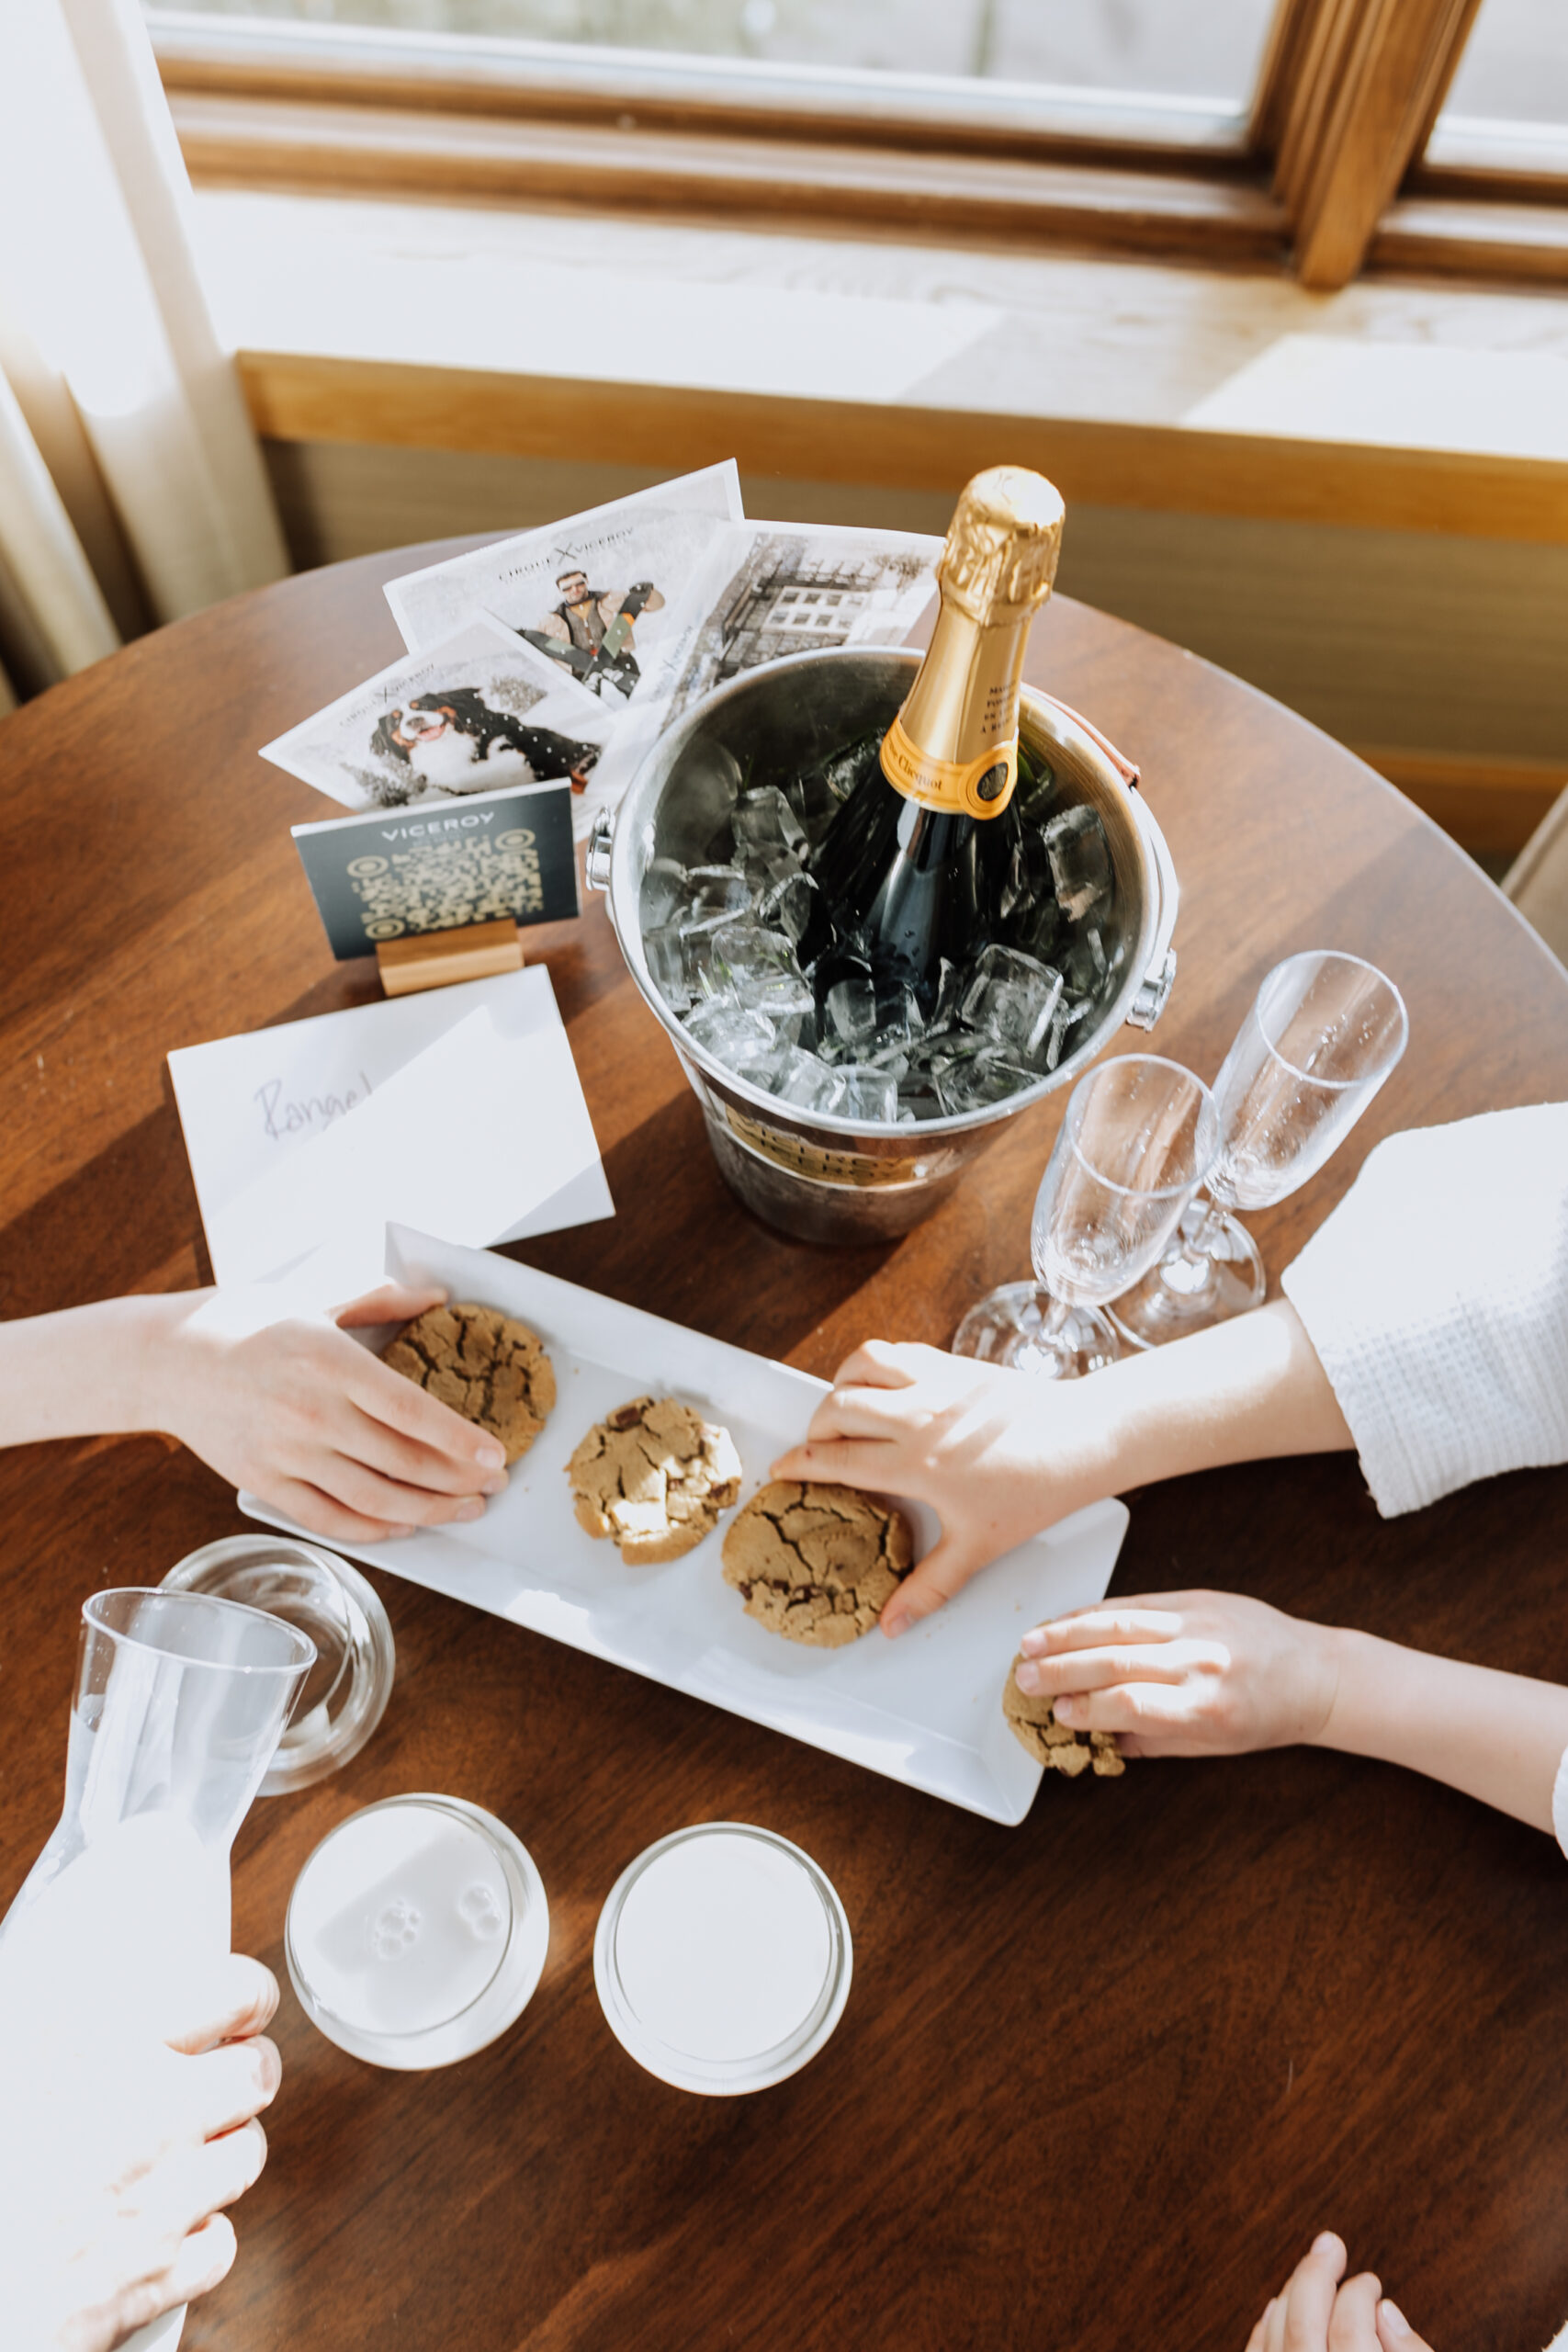 the sweetest welcome gift from the team at the Viceroy Snowmass. this and 5 reasons why Snowmass is IT for your next family ski trip #theviceroy #aspensnowmass #familyskitrip